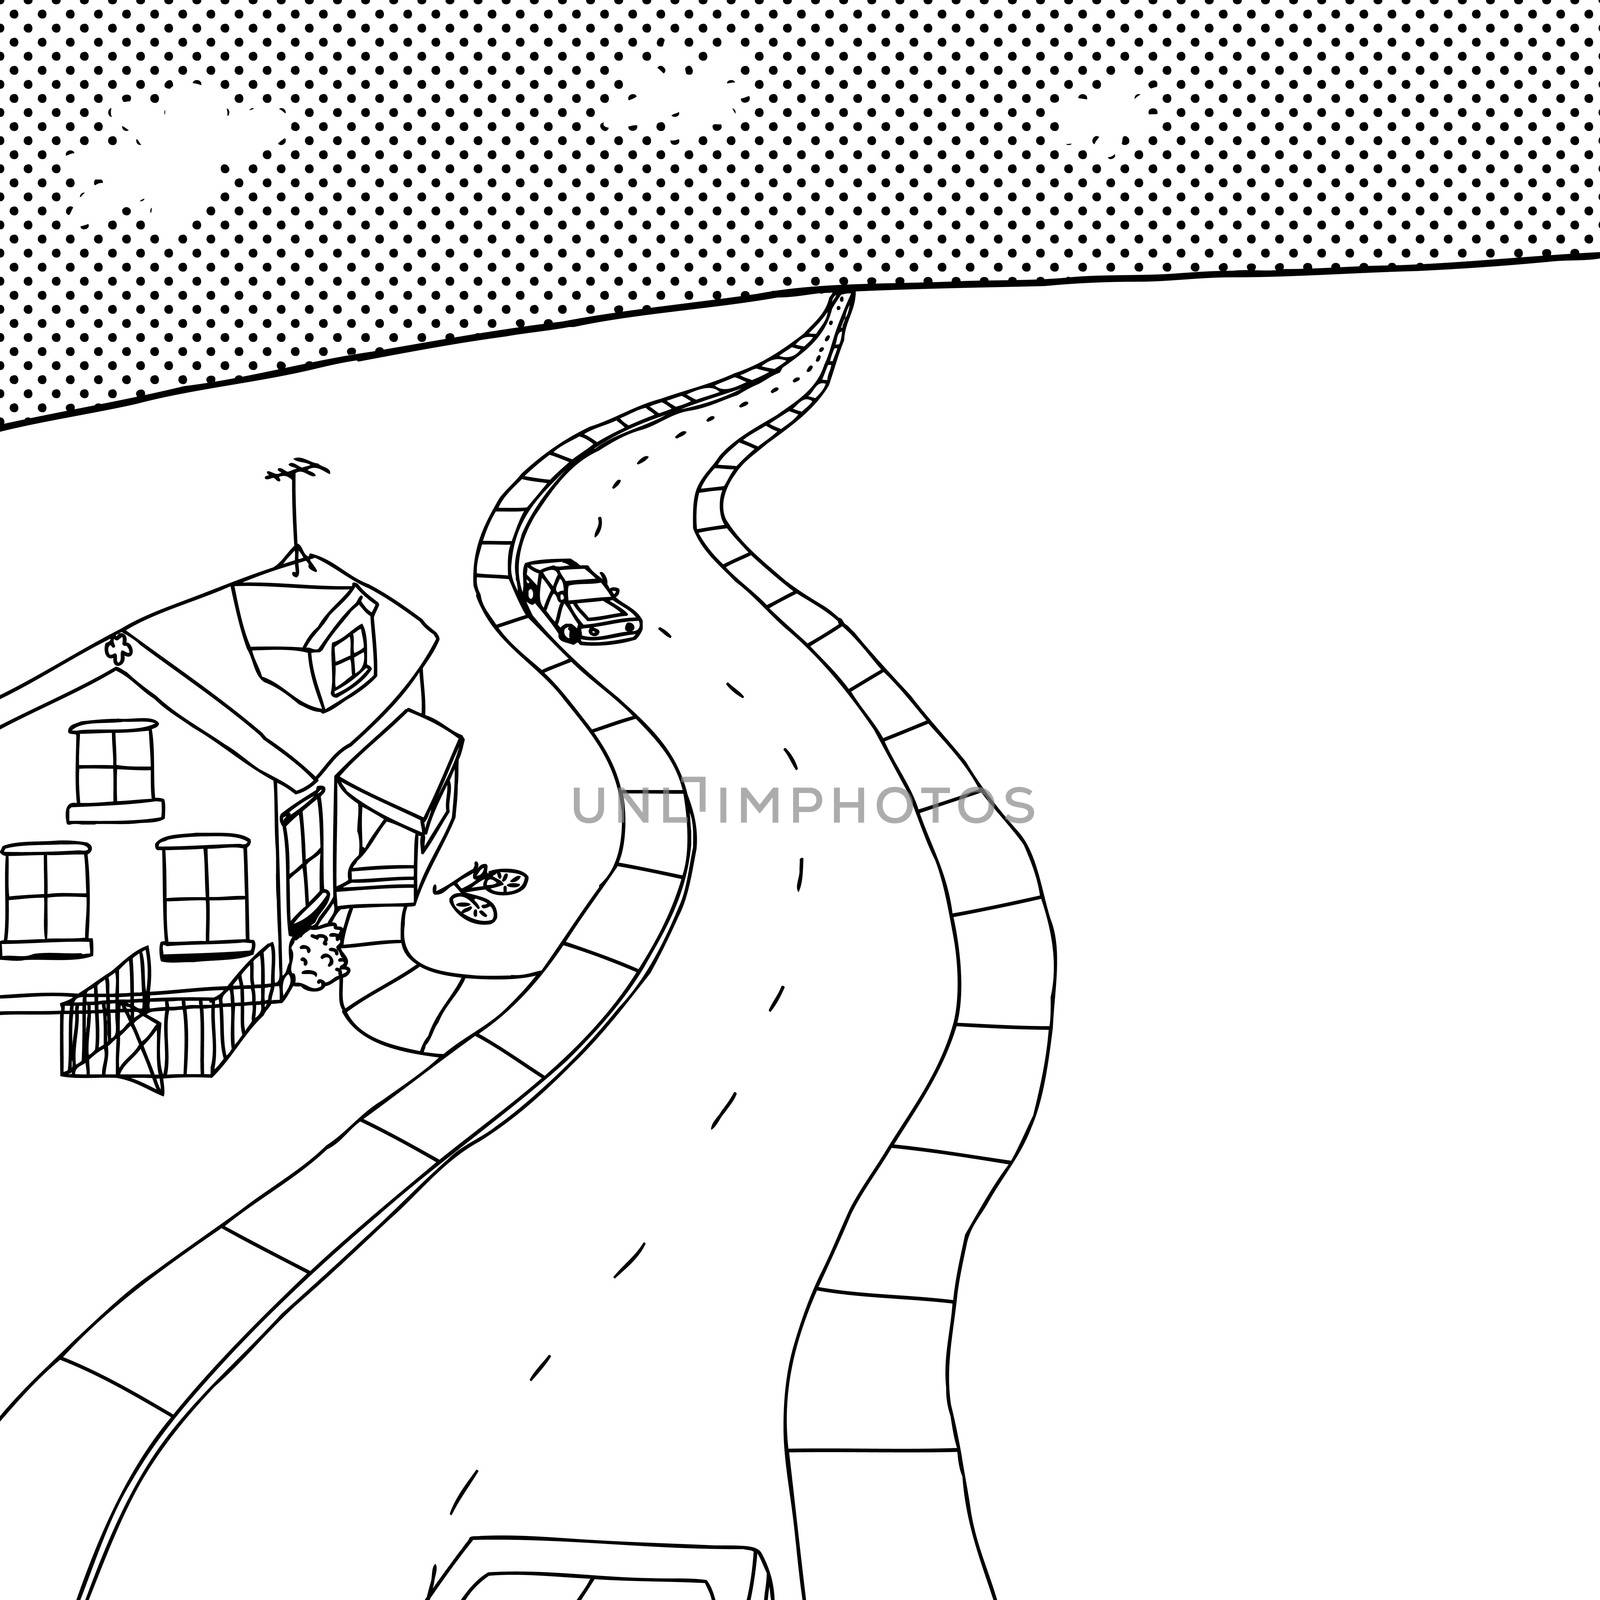 Outline of Road with Little House by TheBlackRhino